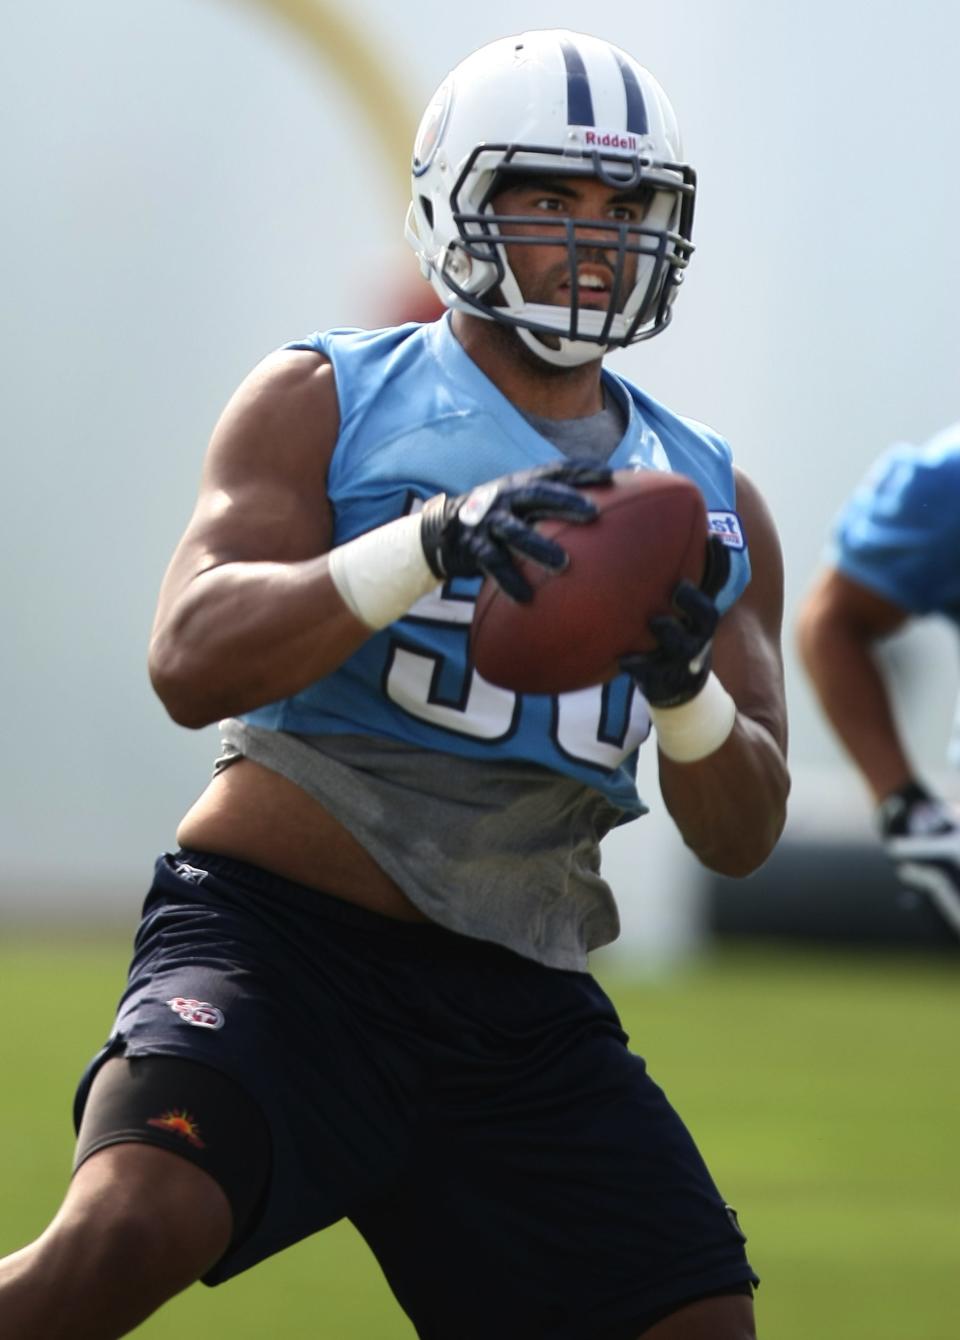 Then-Tennessee Titans linebacker Colin Allred (56) pulls down an interception during practice at Baptist Sports Park in Nashville, Tennessee, on Aug. 16, 2010.